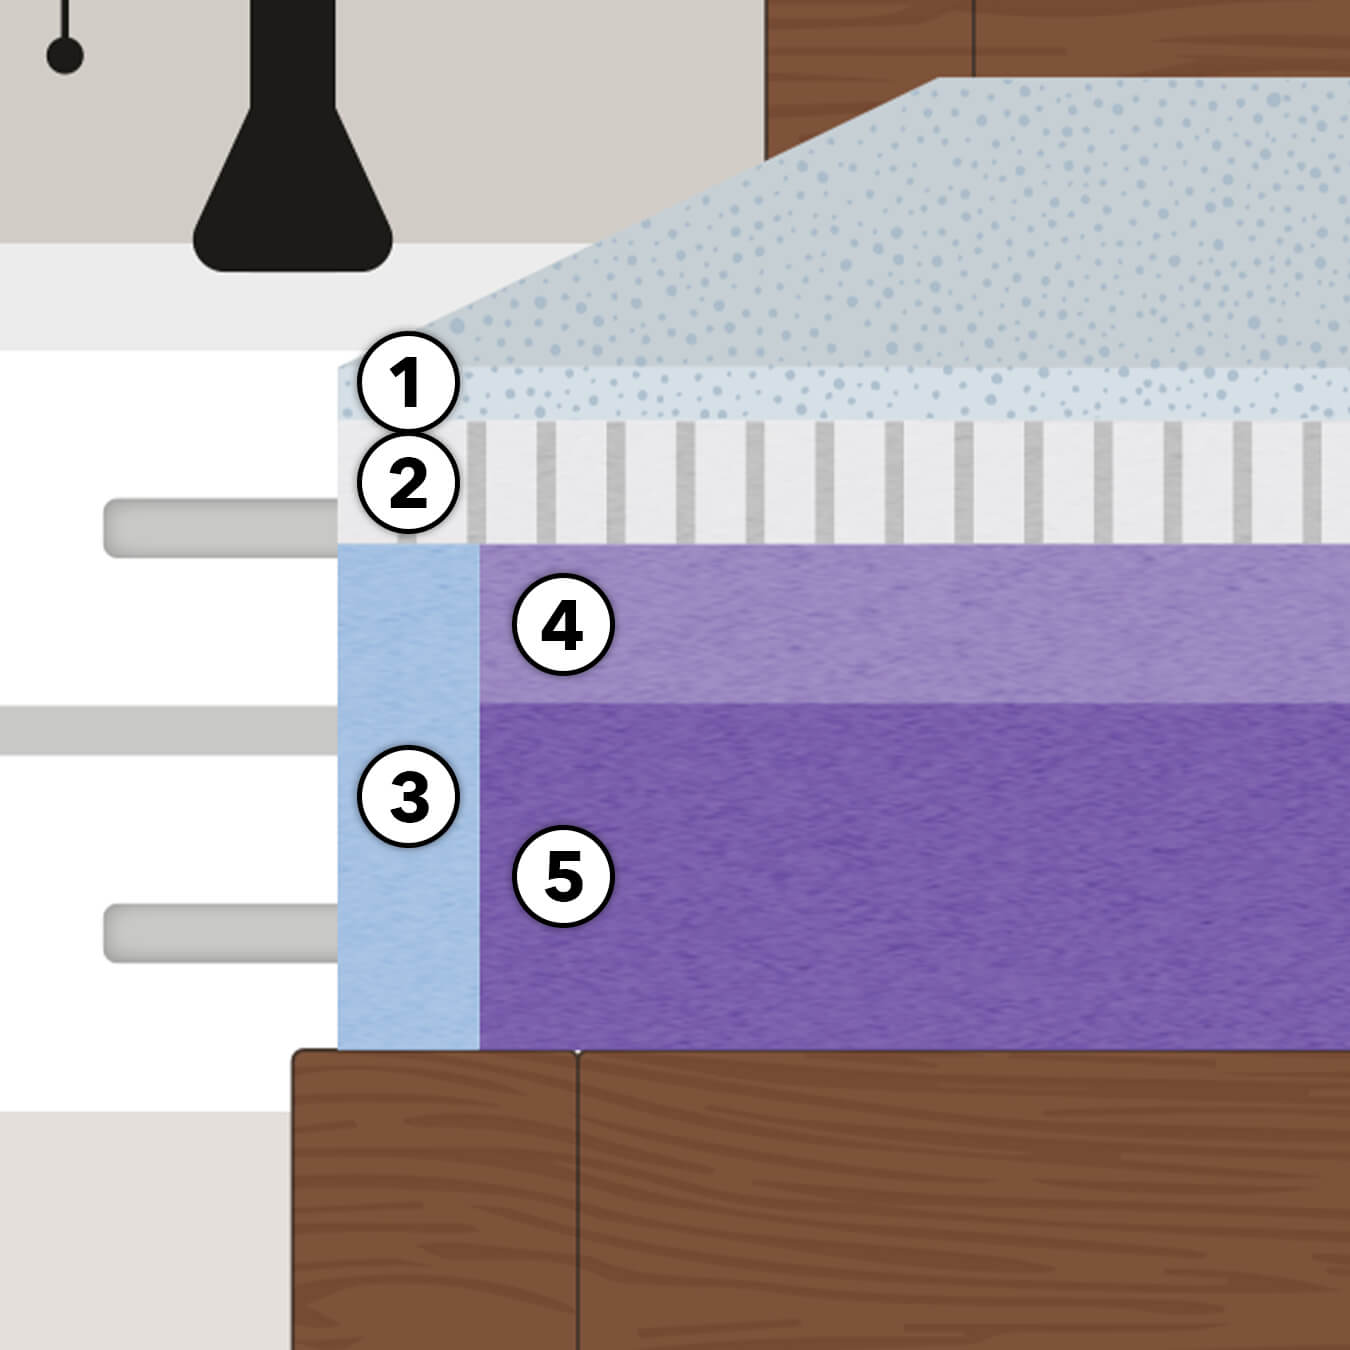 The five inside layers of the Zephyr mattress